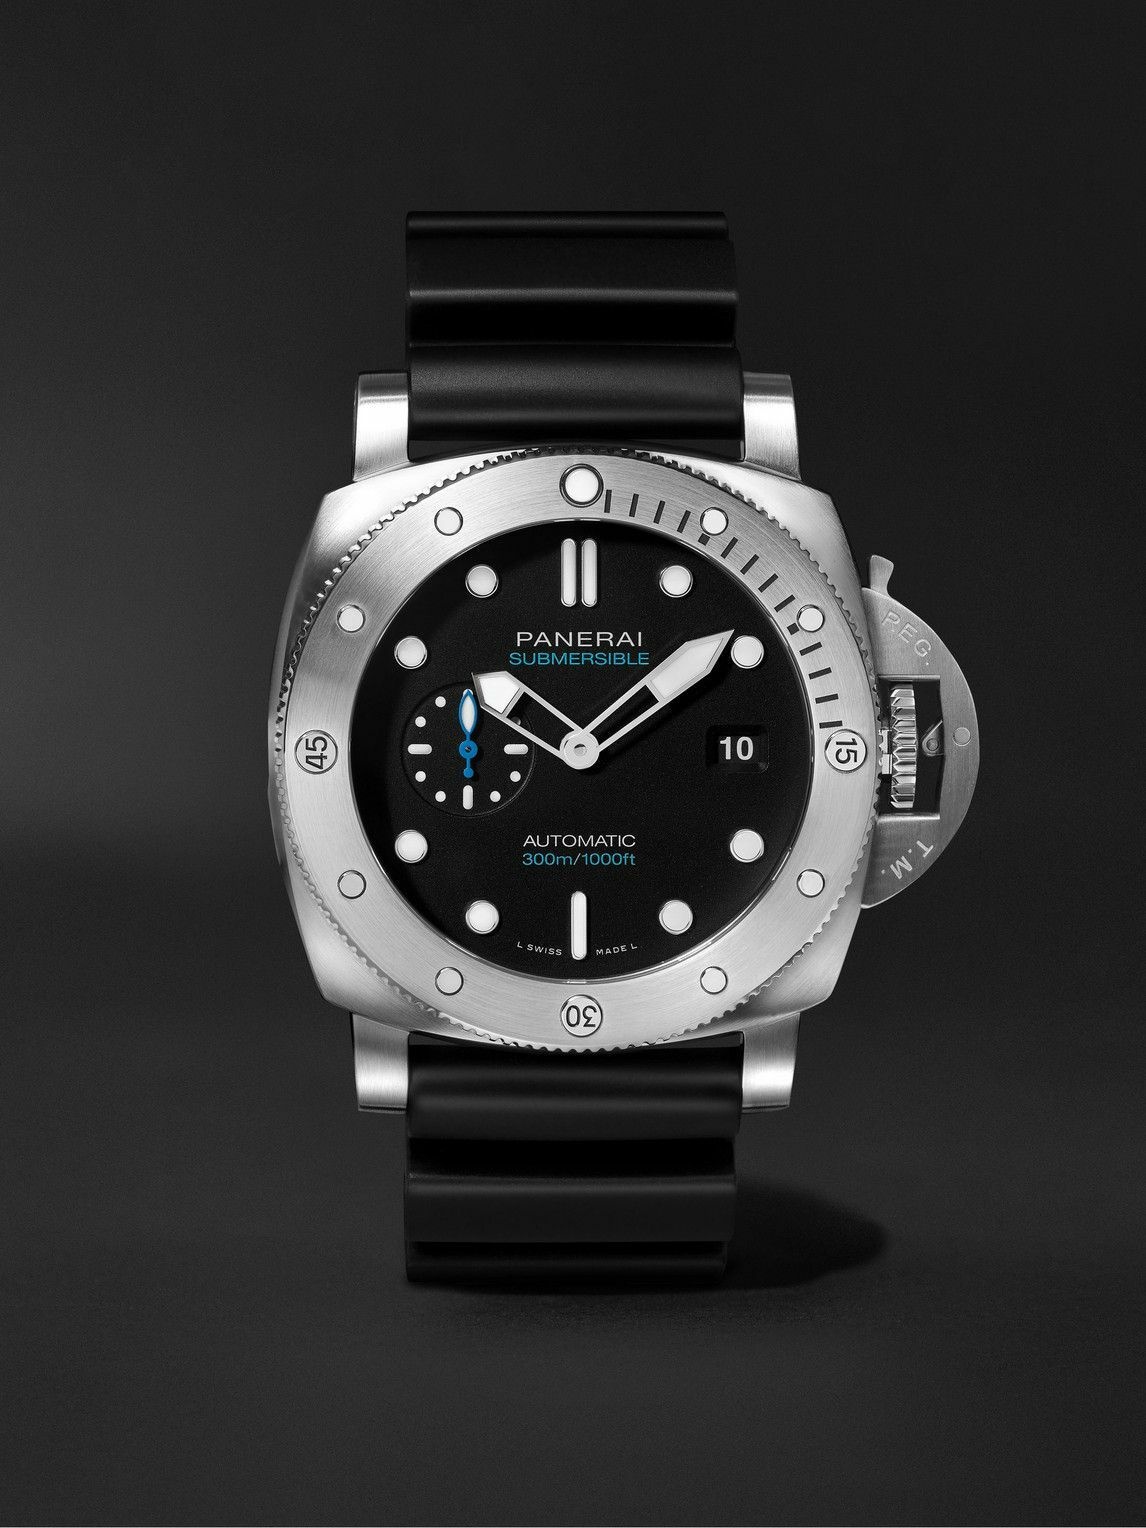 Photo: Panerai - Submersible QuarantaQuattro Automatic 44mm Brushed Stainless Steel and Rubber Watch, Ref. No. PAM01229